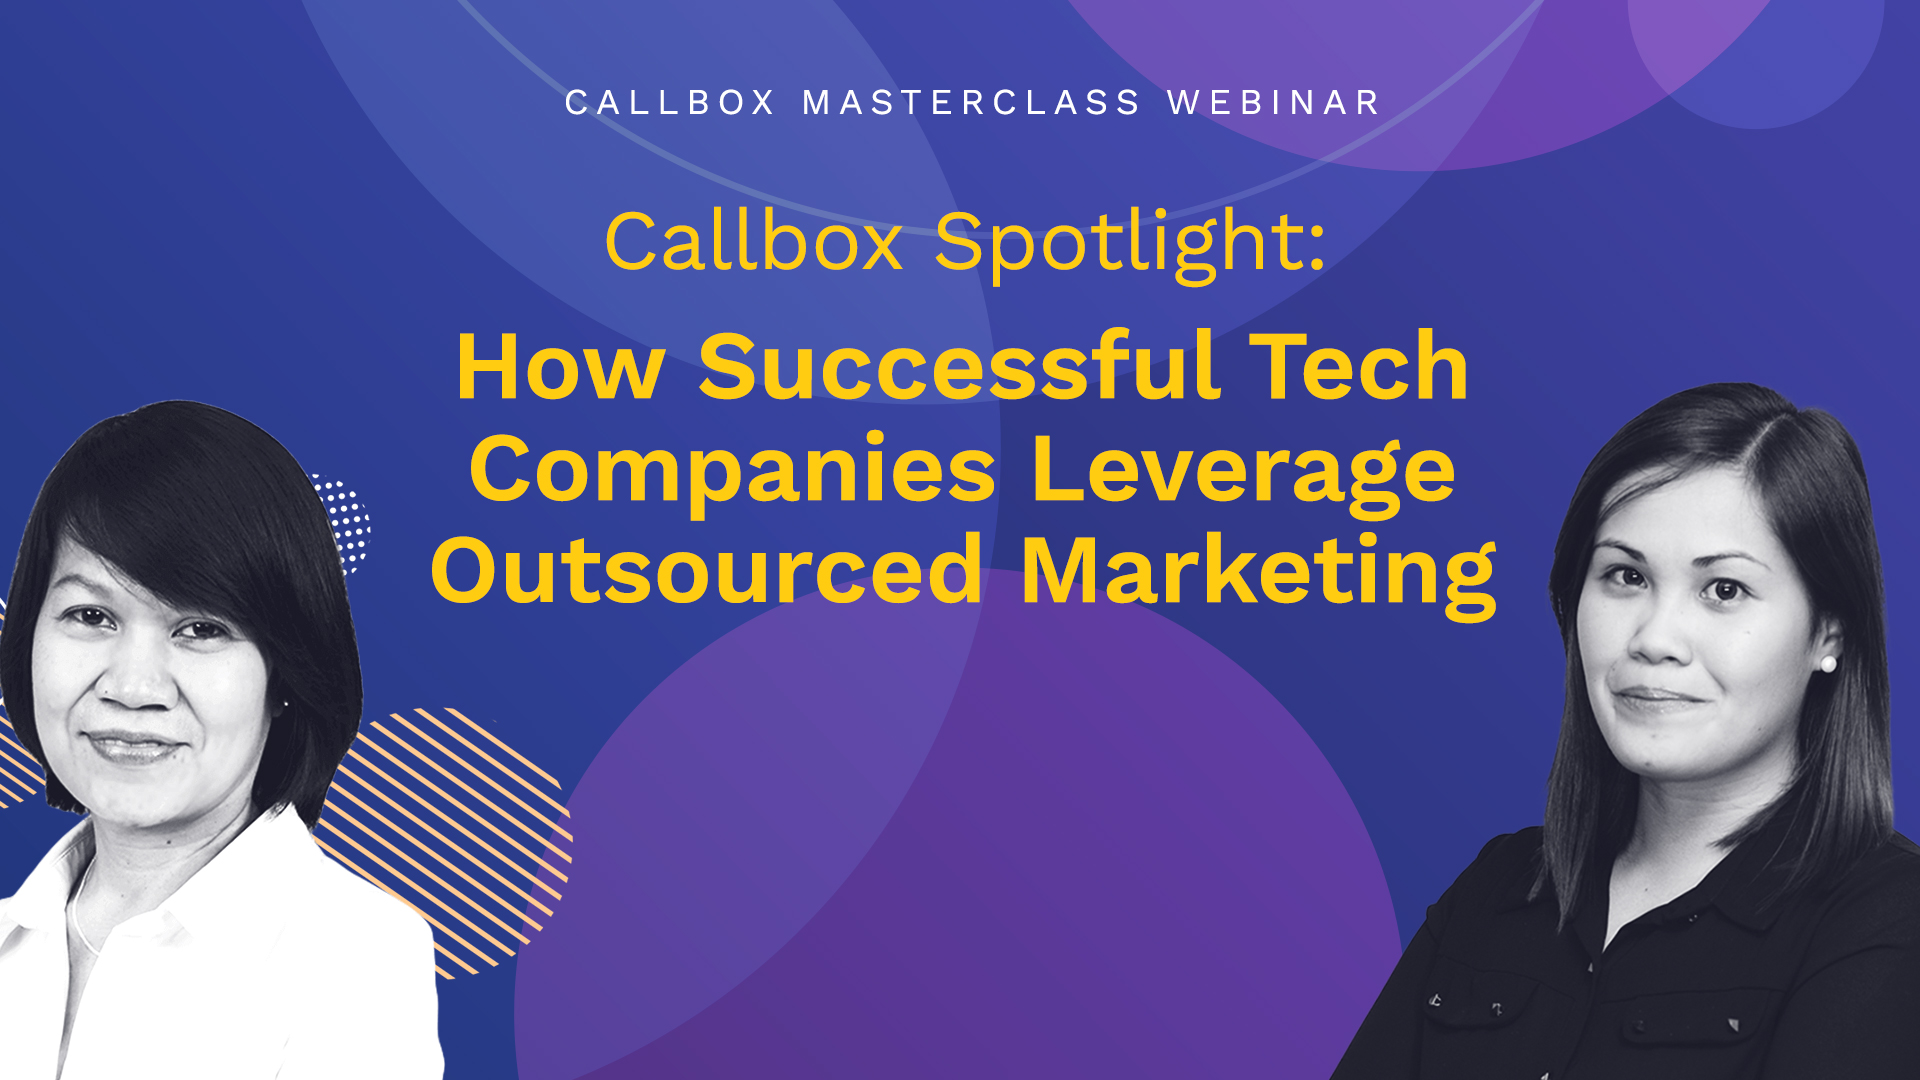 Callbox Spotlight: How Successful Tech Companies Leverage Outsourced Marketing